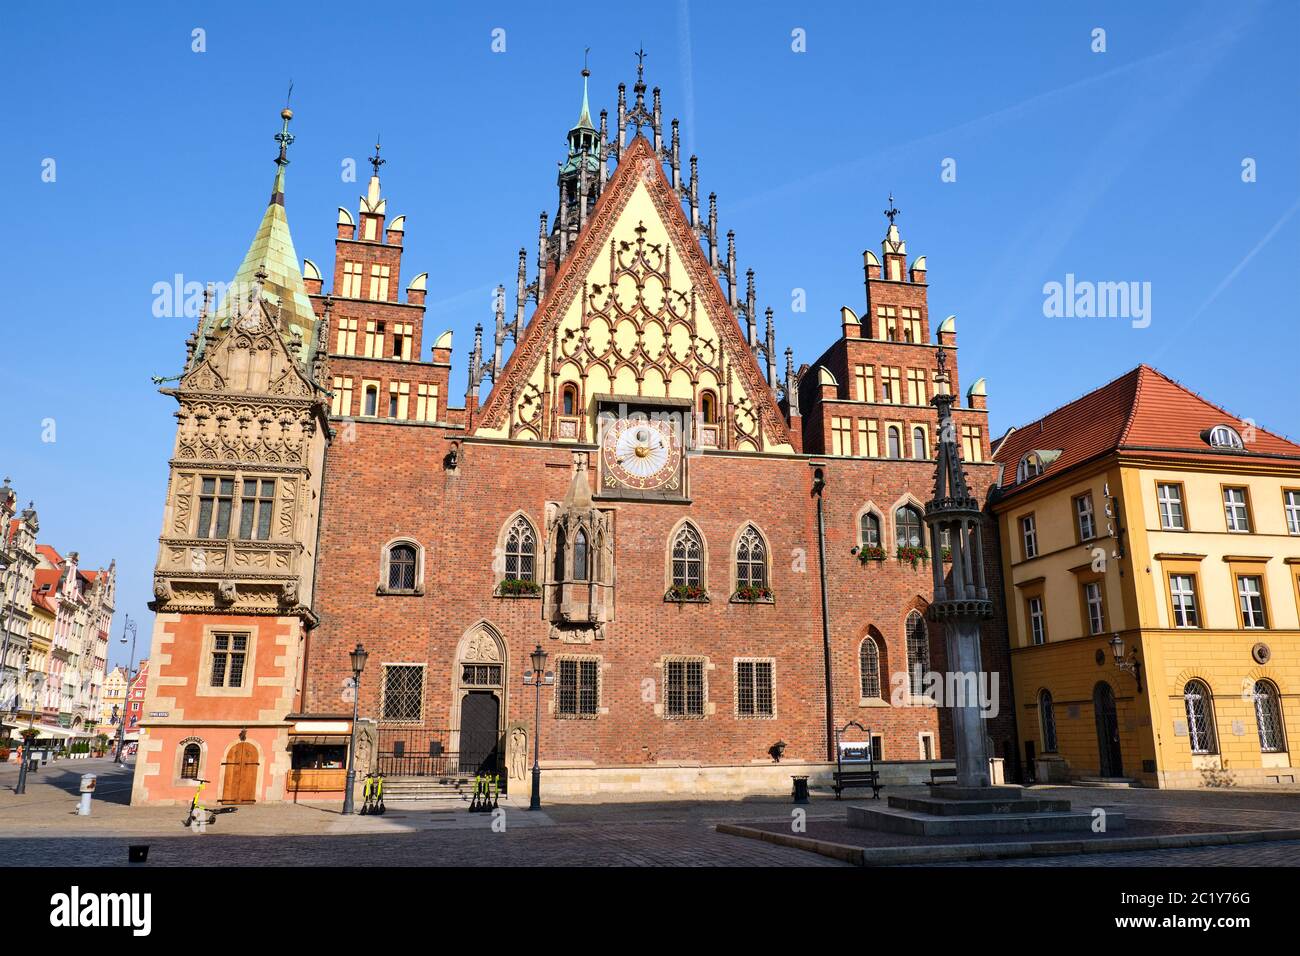 The beautiful Old Town Hall Of Wroclaw in Poland Stock Photo